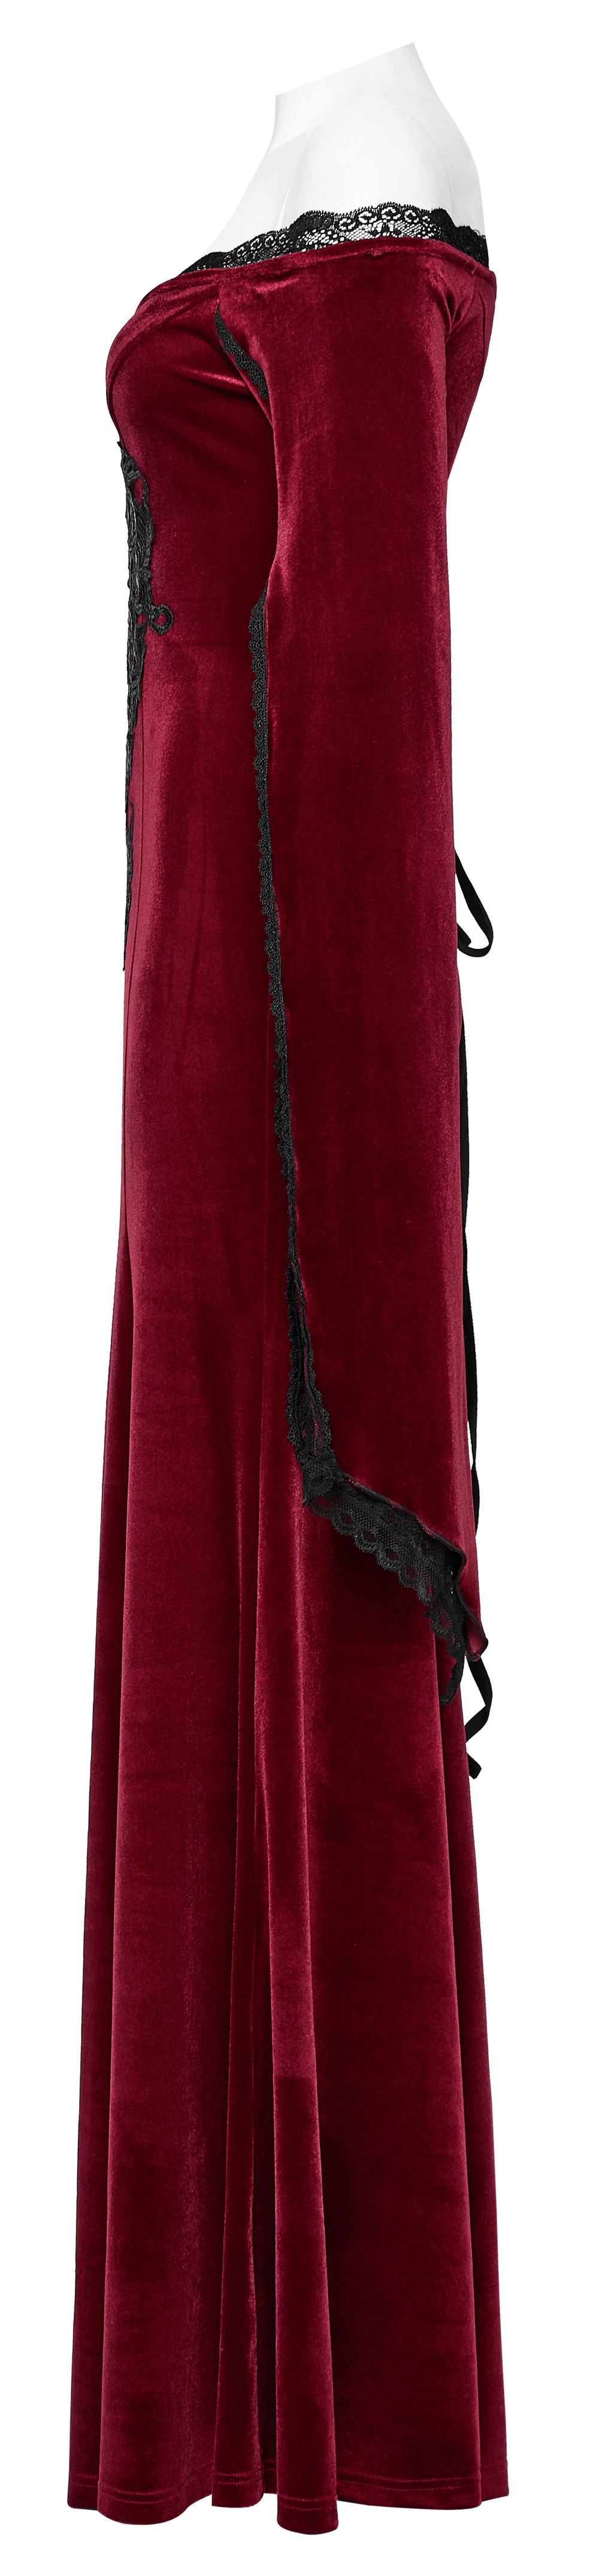 Elegant Red Velvet Gothic Dress with Lace Sleeves - HARD'N'HEAVY